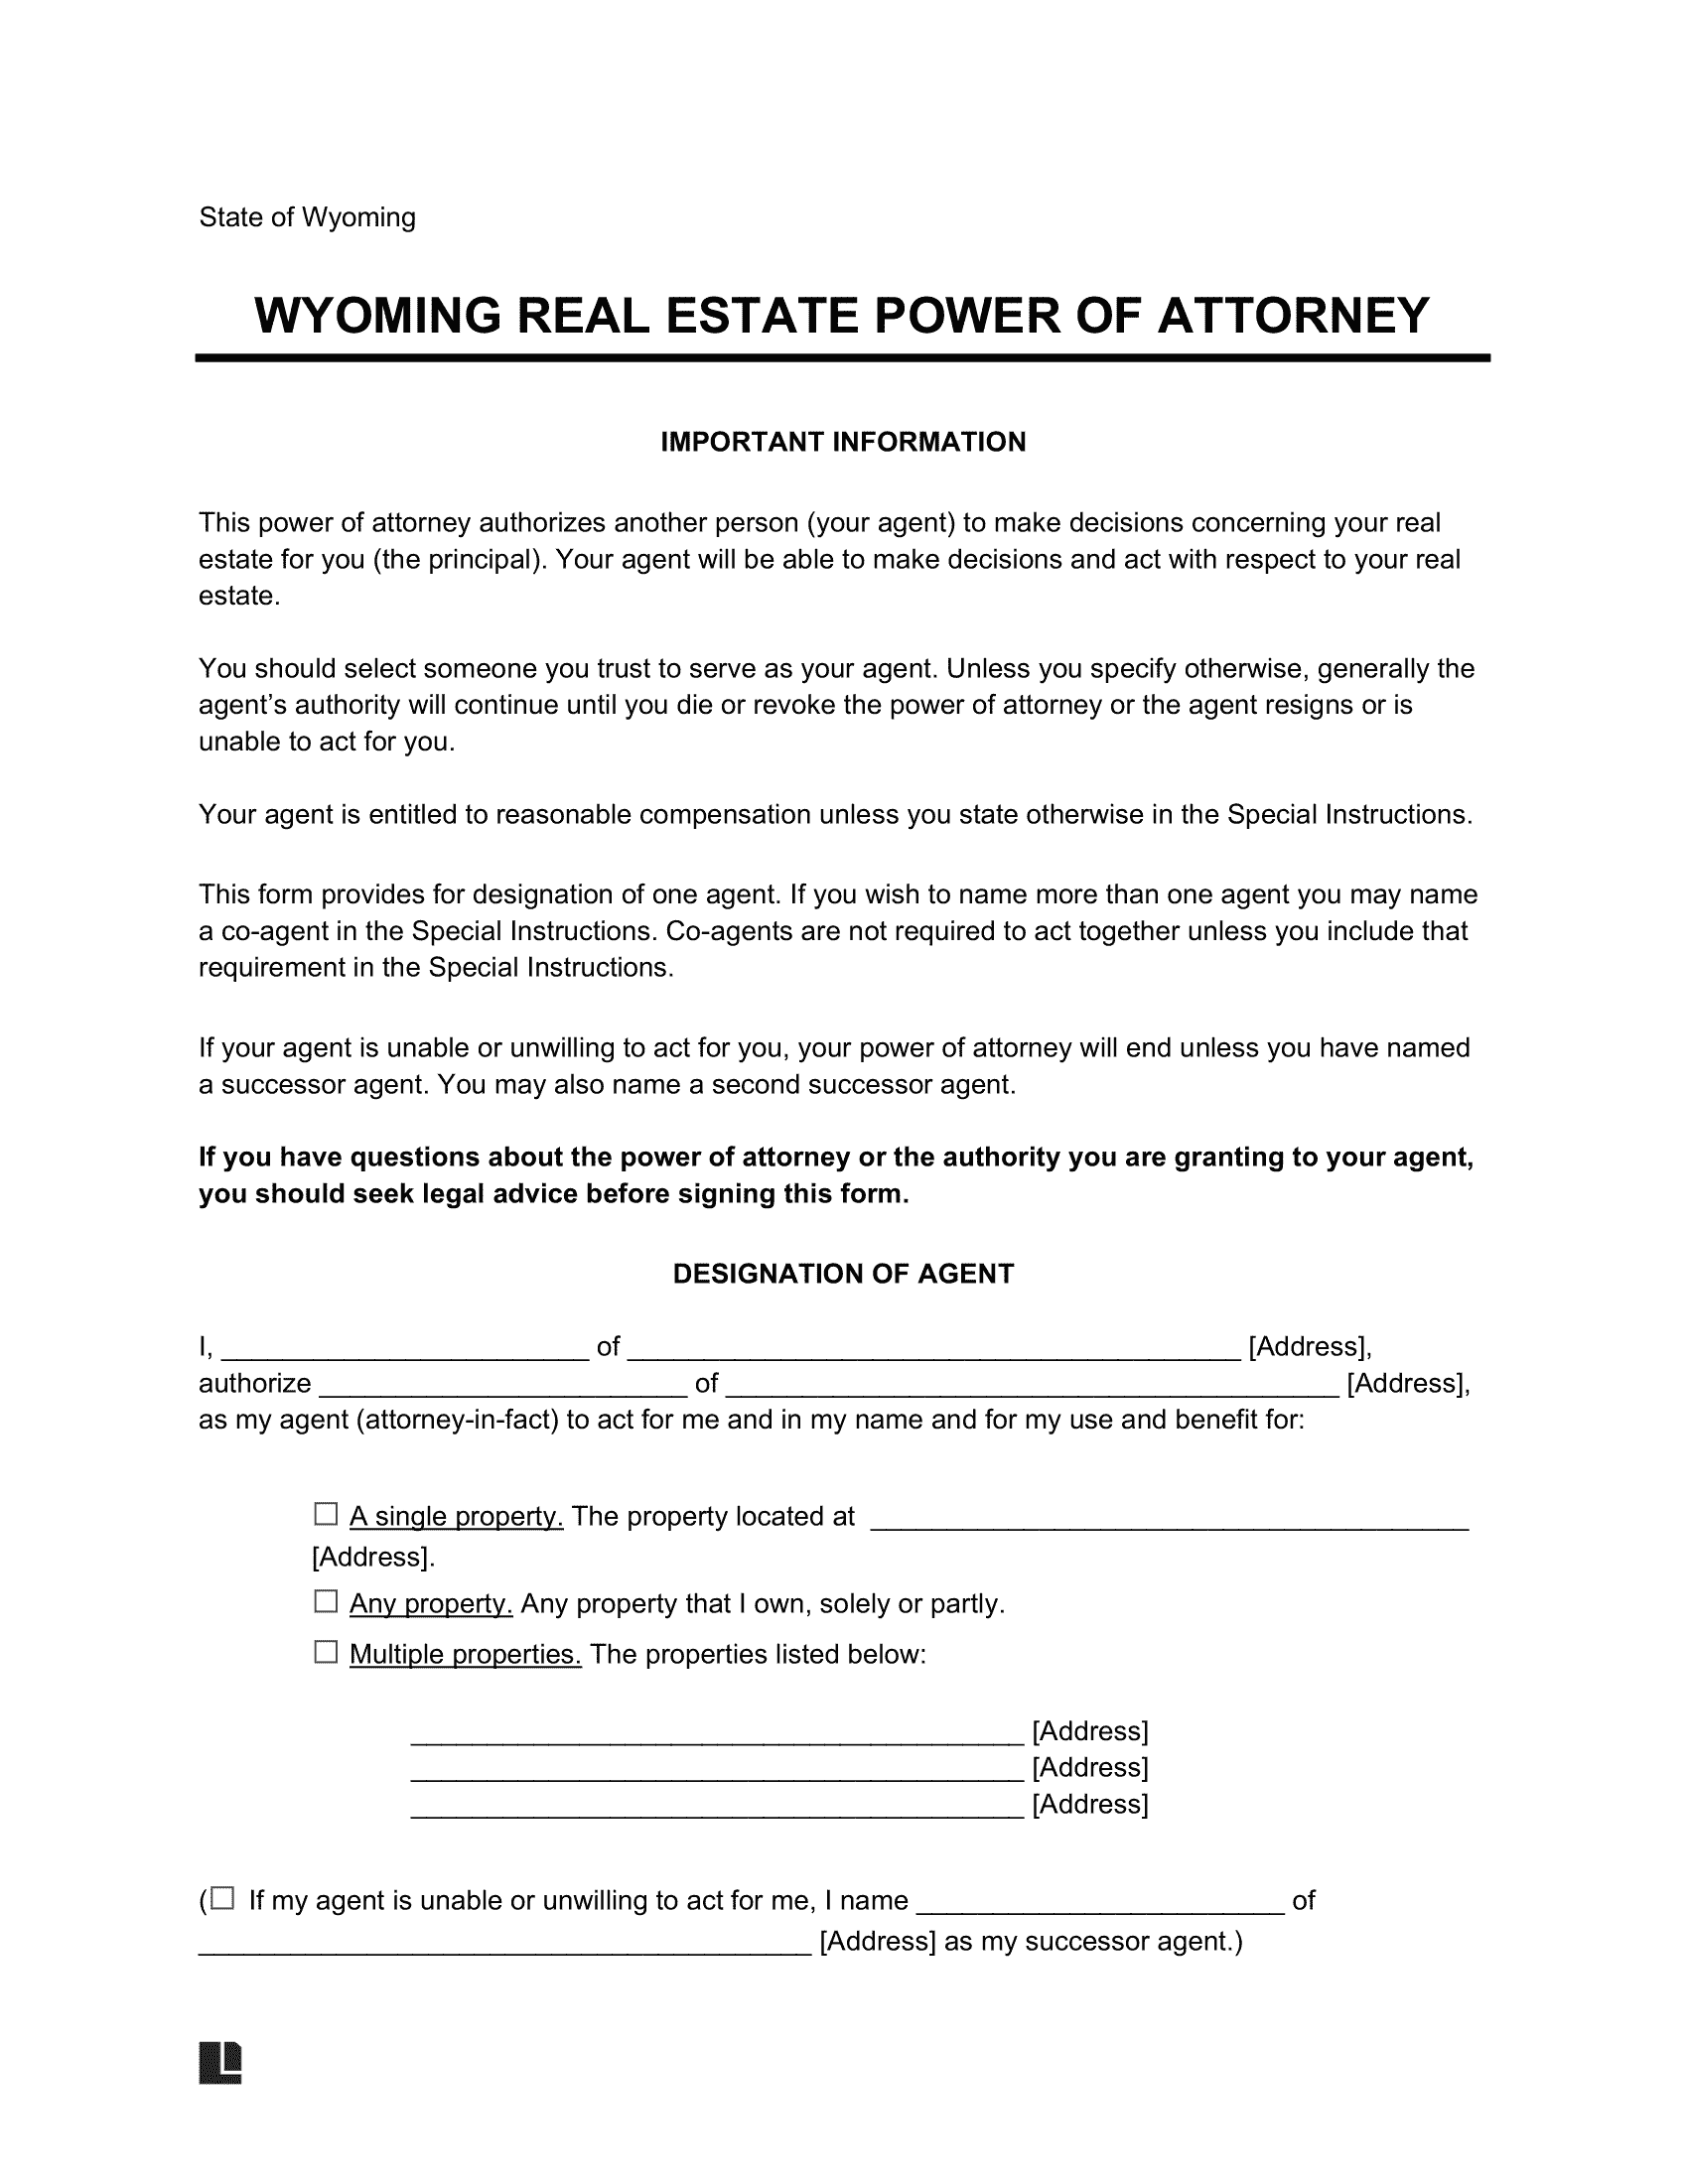 Wyoming Real Estate Power of Attorney Form